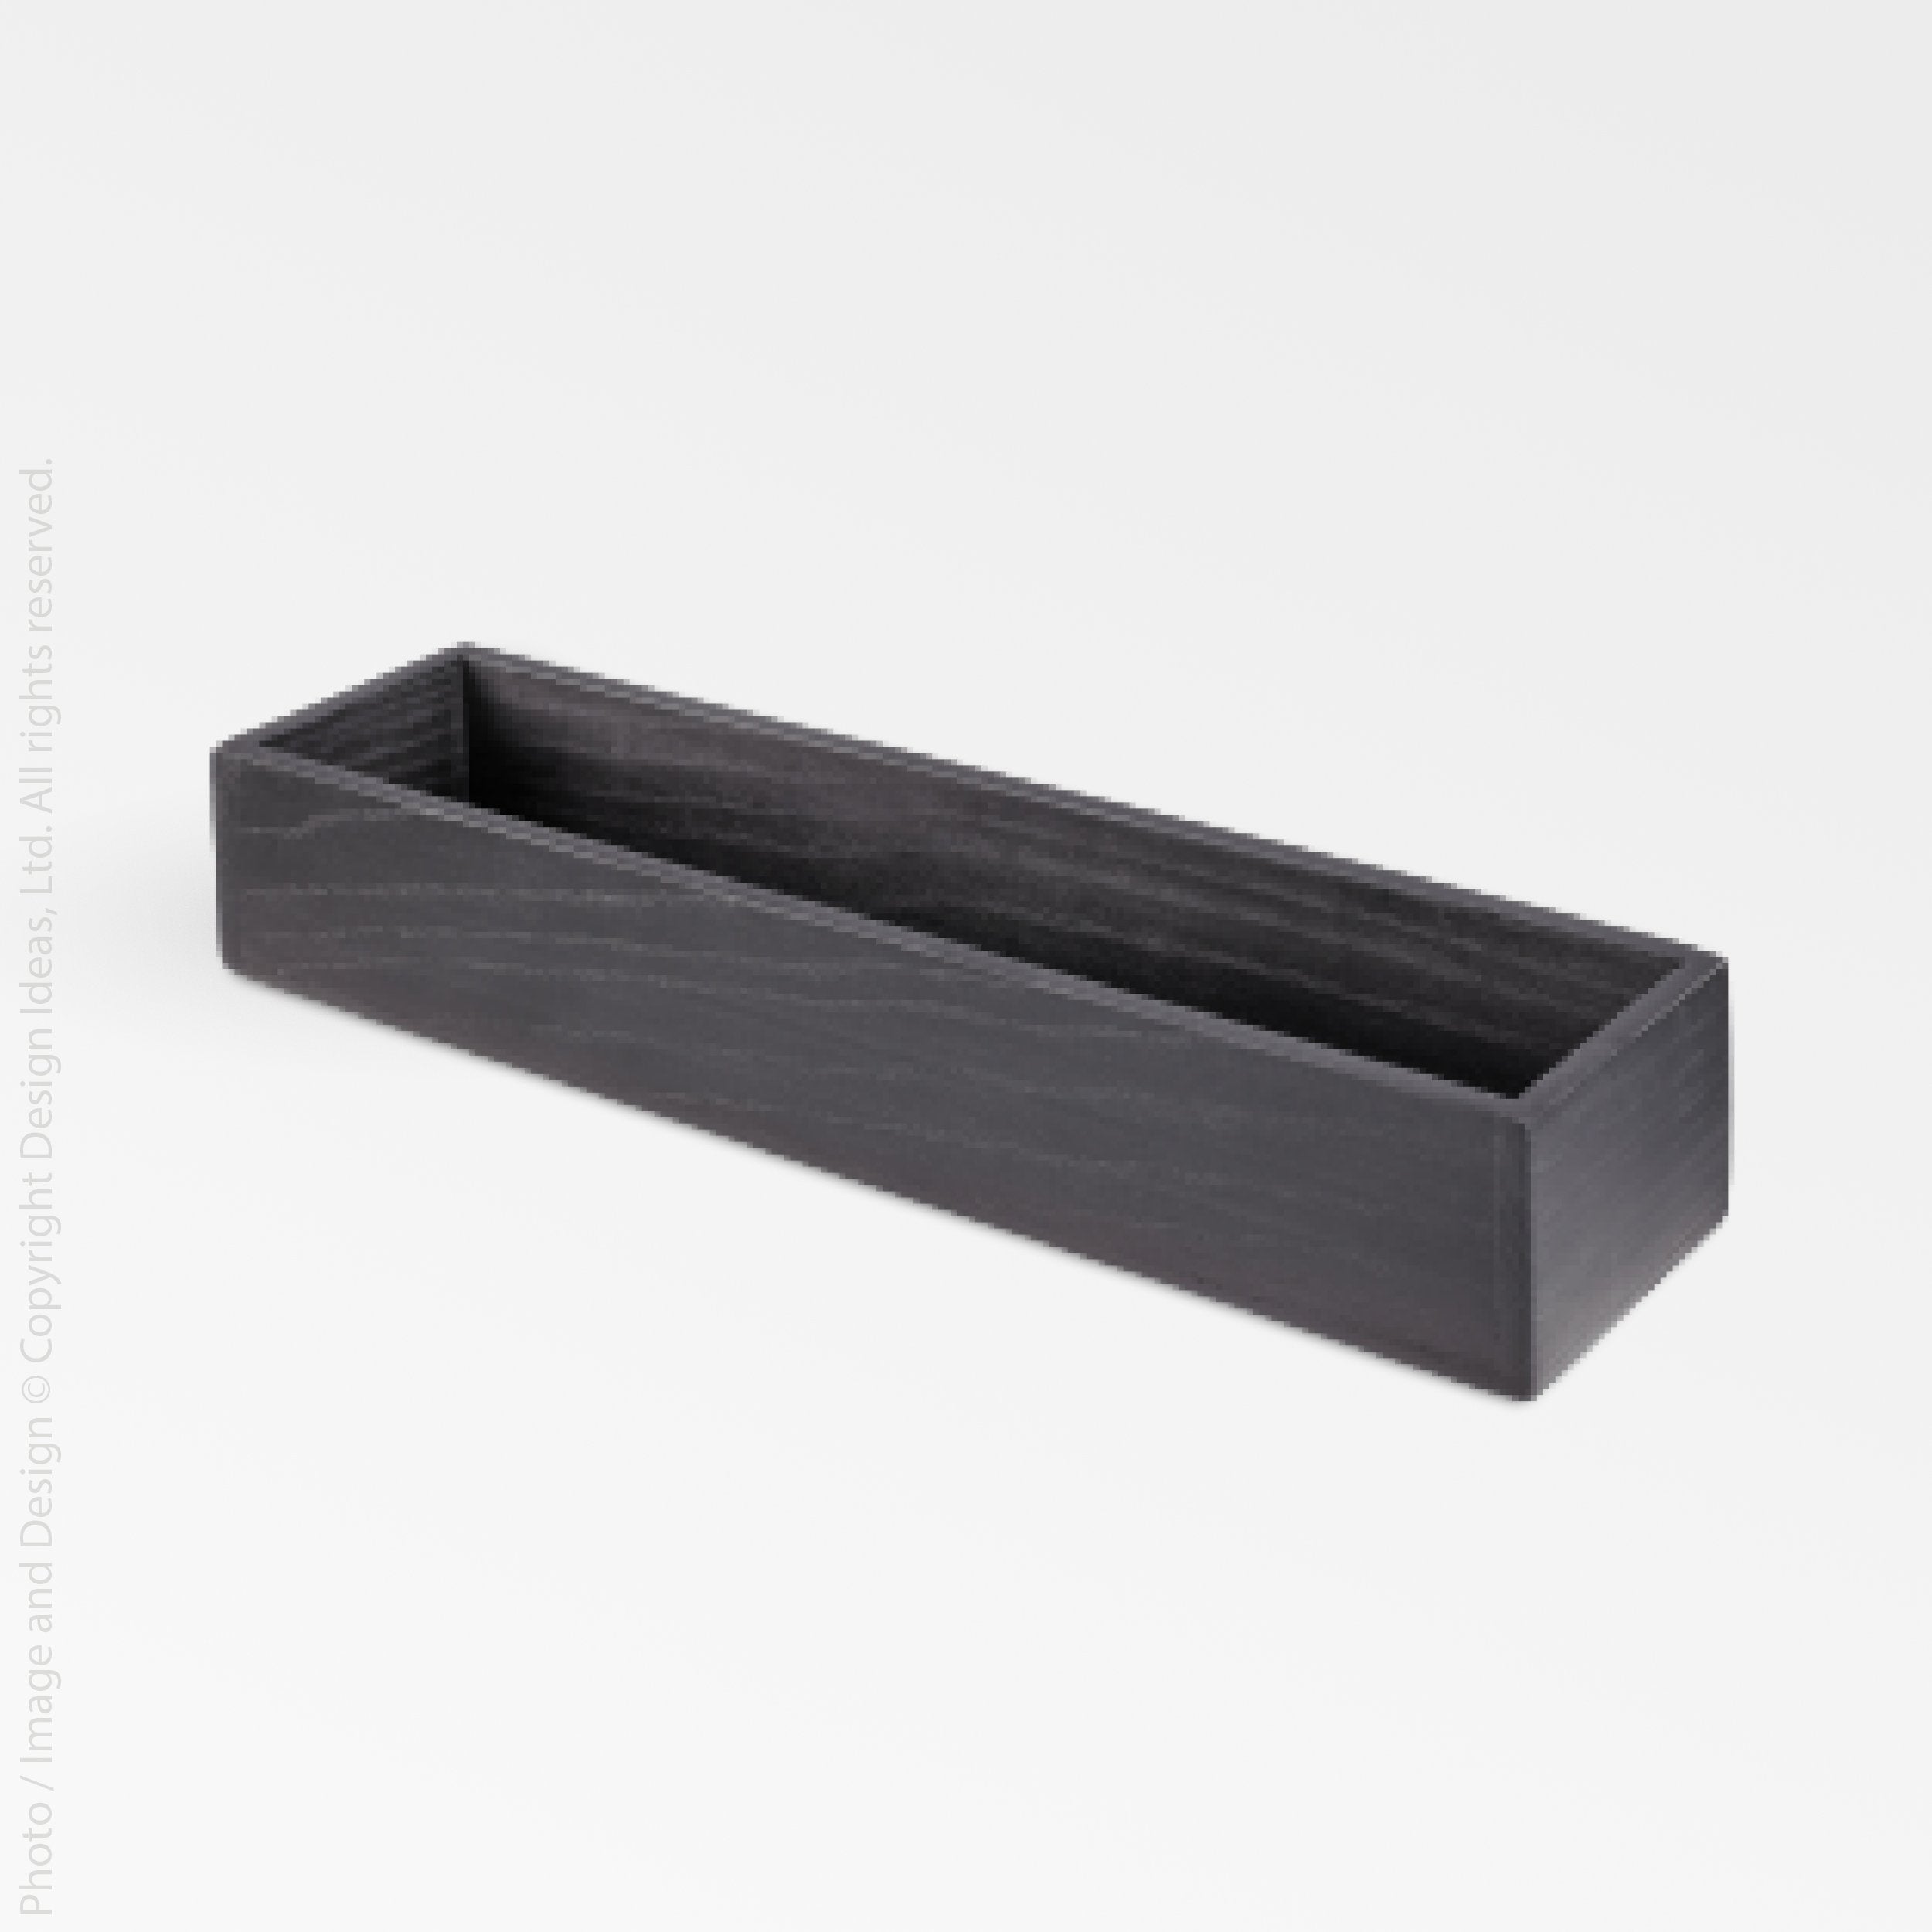 Ashland Ash Wood Drawer Organizer (3x12) - Black Color | Image 1 | From the Ashland Collection | Expertly created with natural ash wood for long lasting use | Available in black color | texxture home